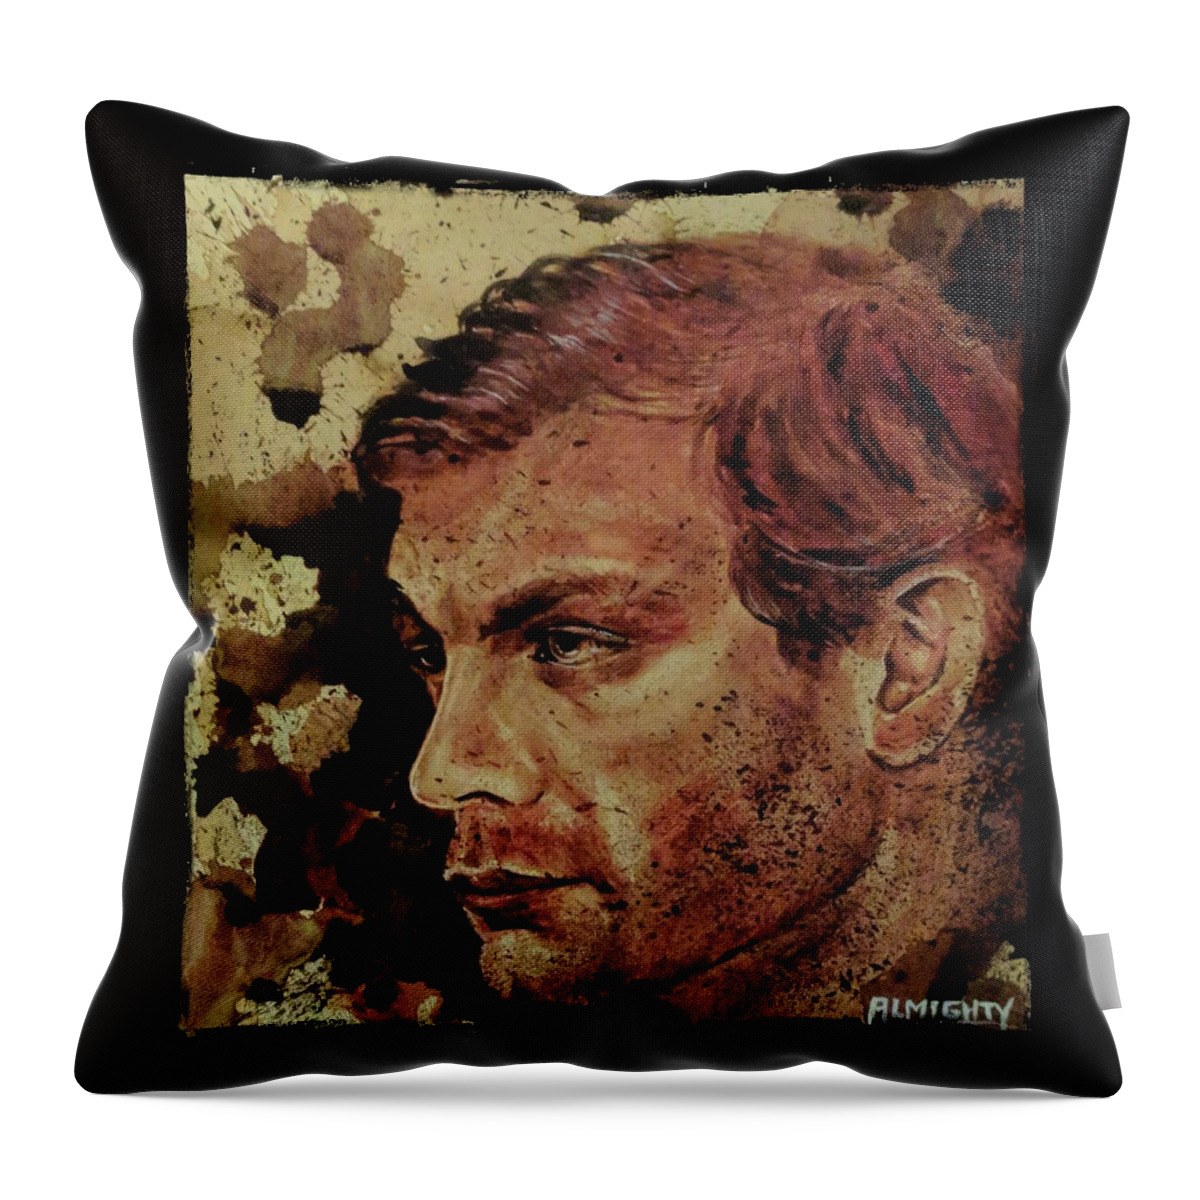 Ryan Almighty Throw Pillow featuring the painting Jeffrey Dahmer by Ryan Almighty